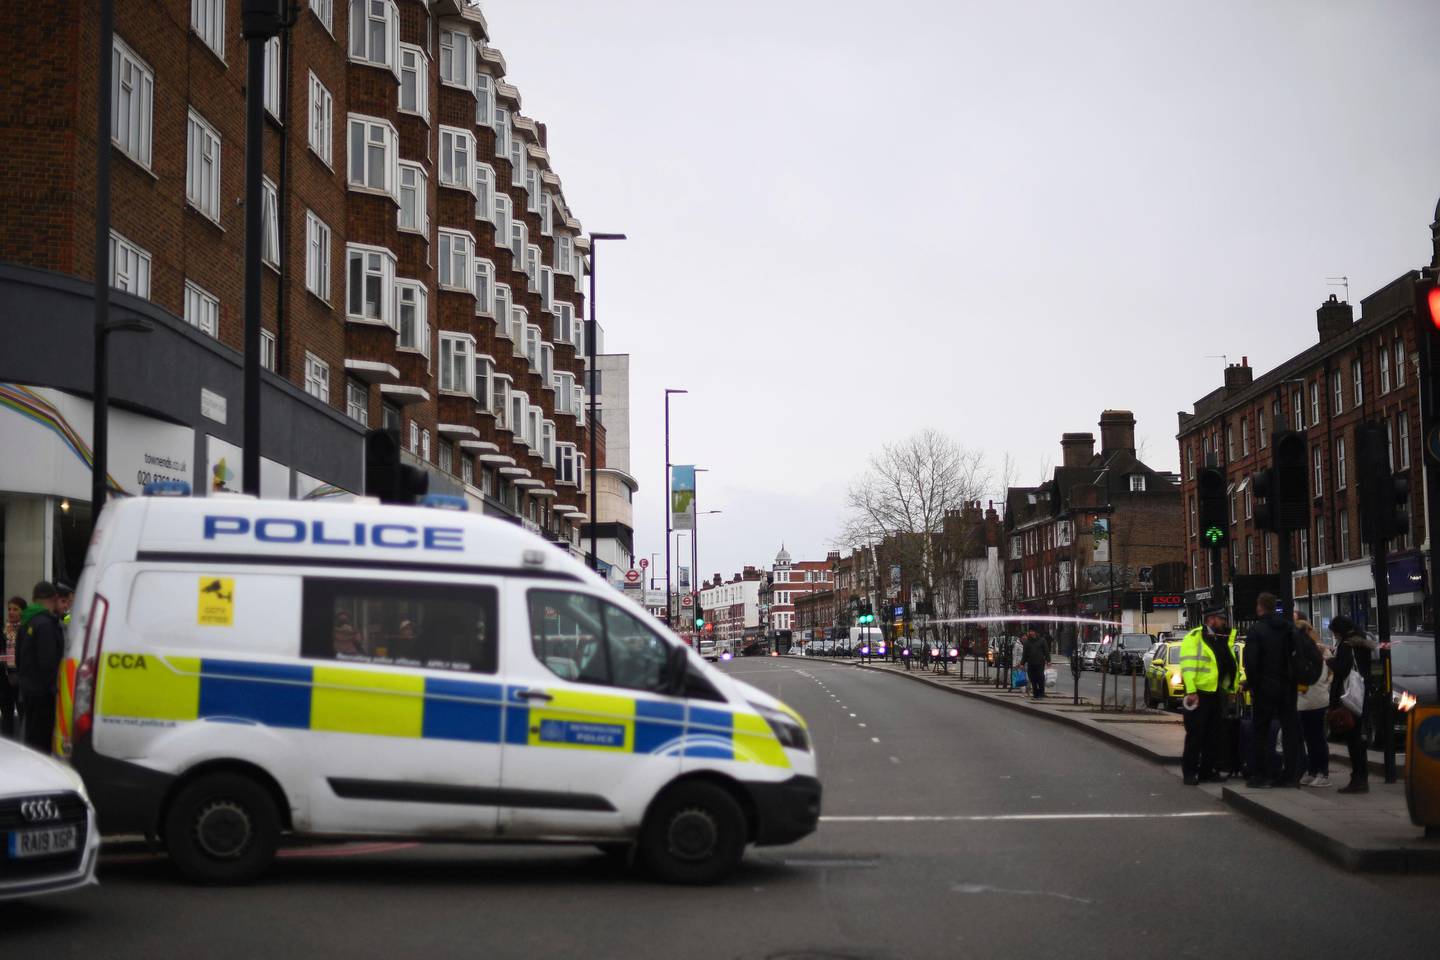 Police at the scene after an incident in Streatham, London, Sunday Feb. 2, 2020. London police say officers shot a man during a terrorism-related incident that involved the stabbings of a number of people. (Victoria Jones/PA via AP)